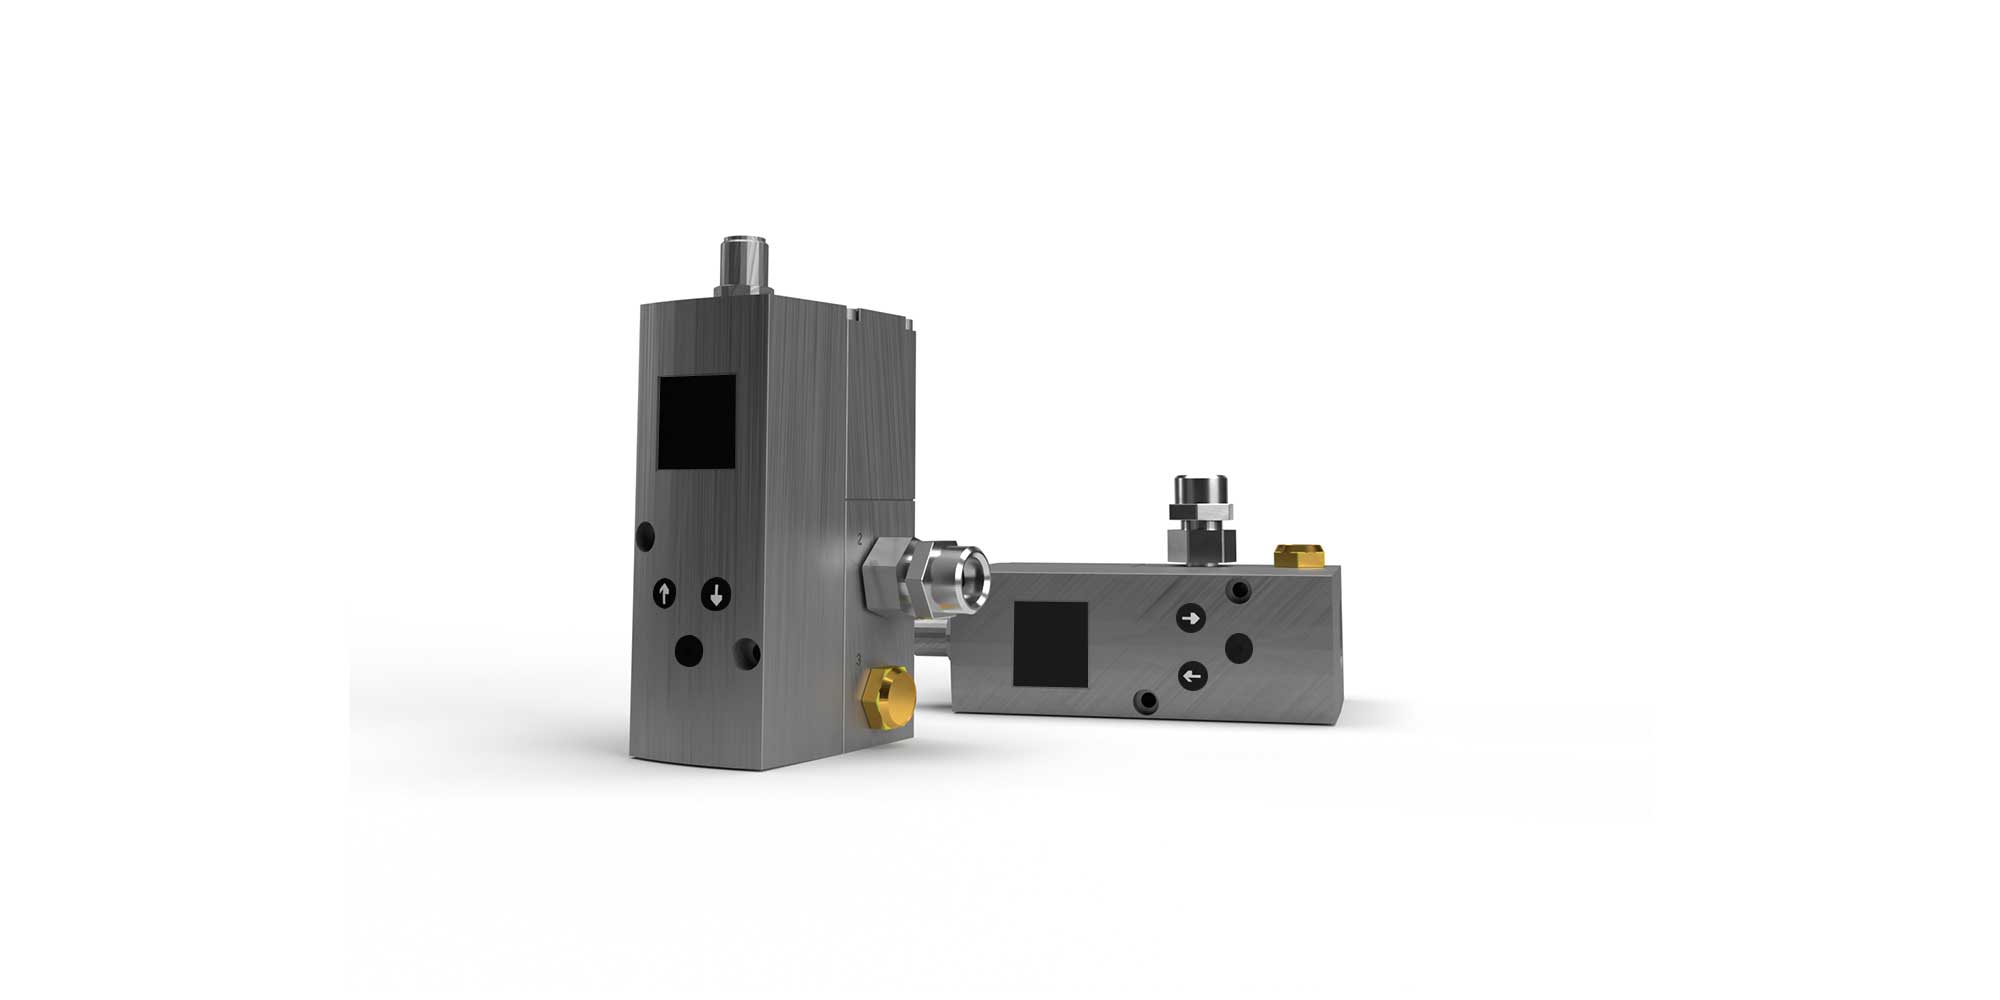 Proportional pressure regulators for air operated pinch valves